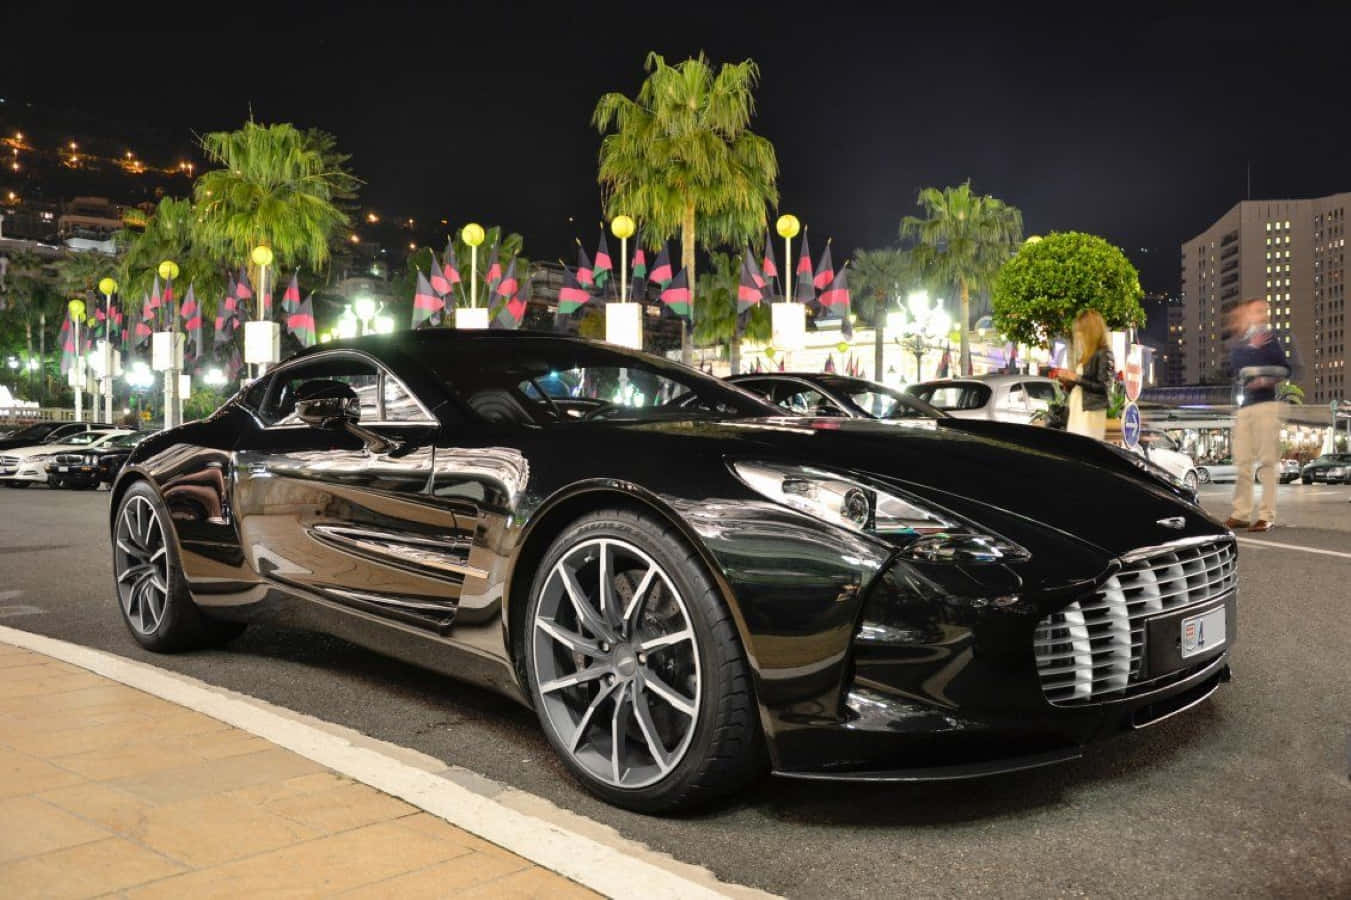 Aston Martin One-77 Limited Edition Supercar on Display Wallpaper